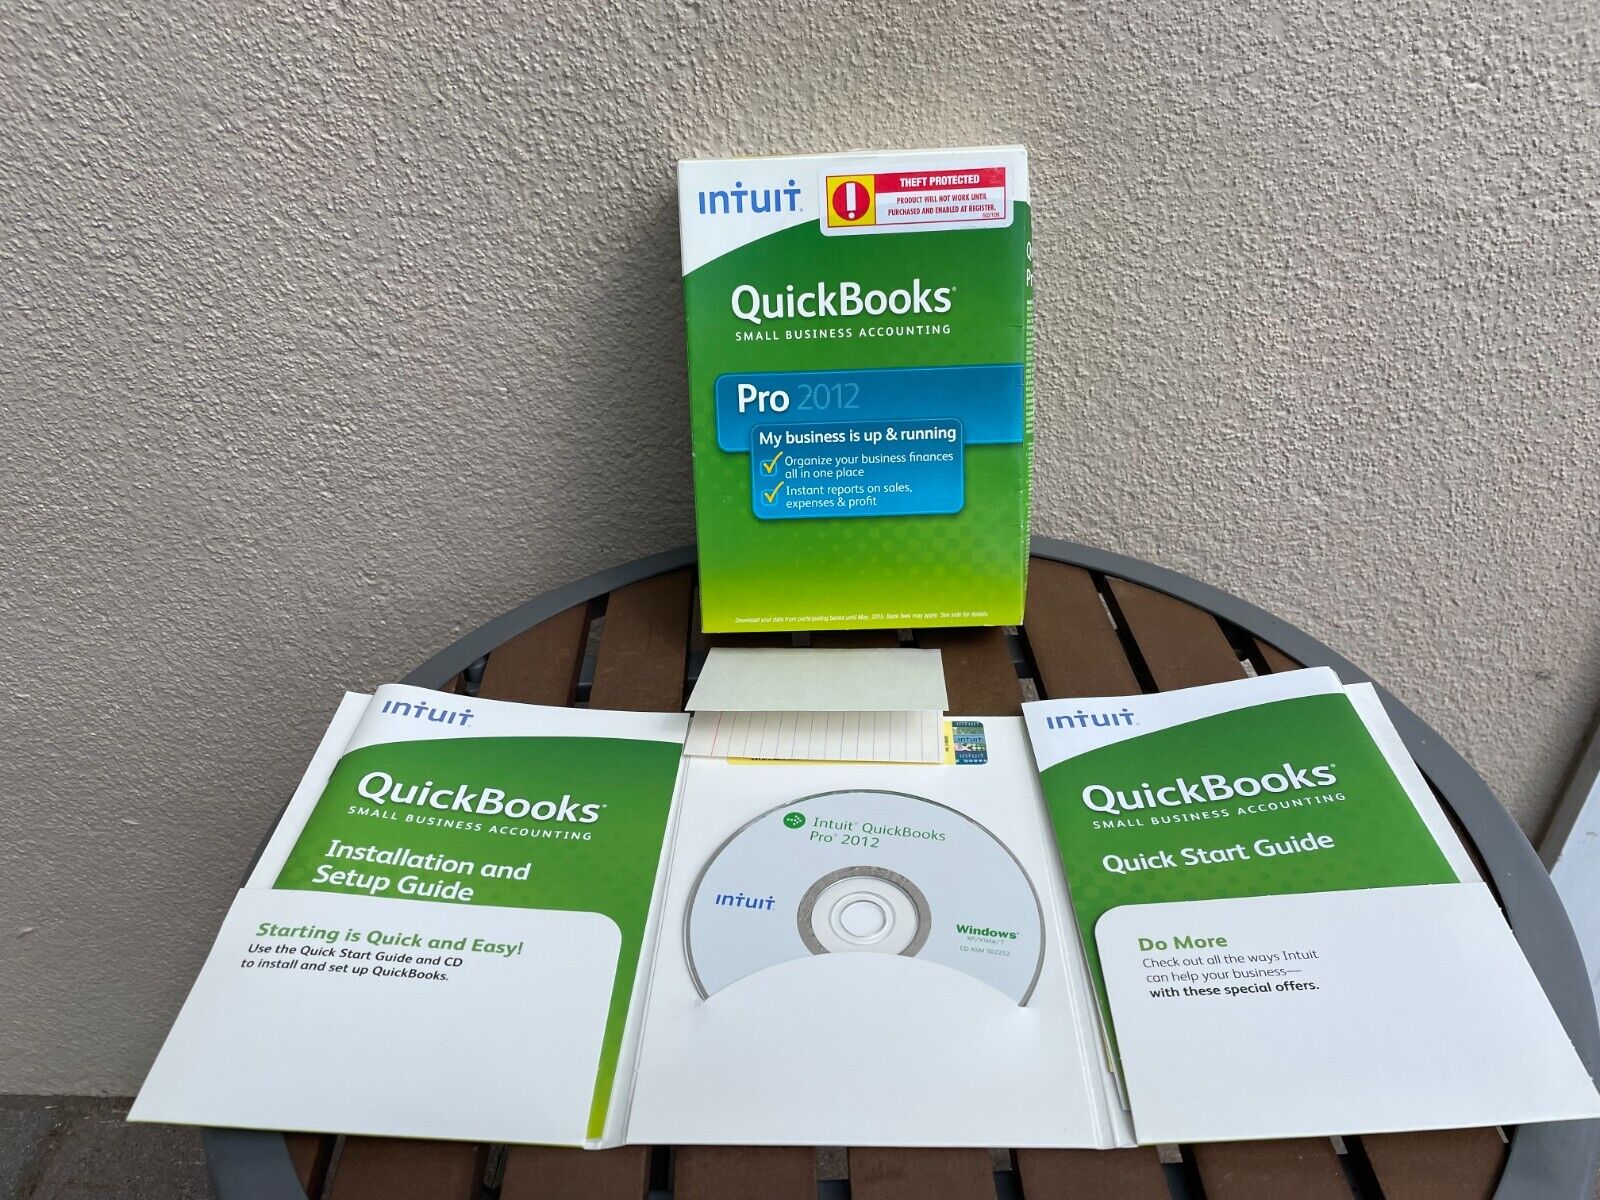 Intuit QuickBooks Pro 2012 Small Business Accounting Software Windows 7 w/Key